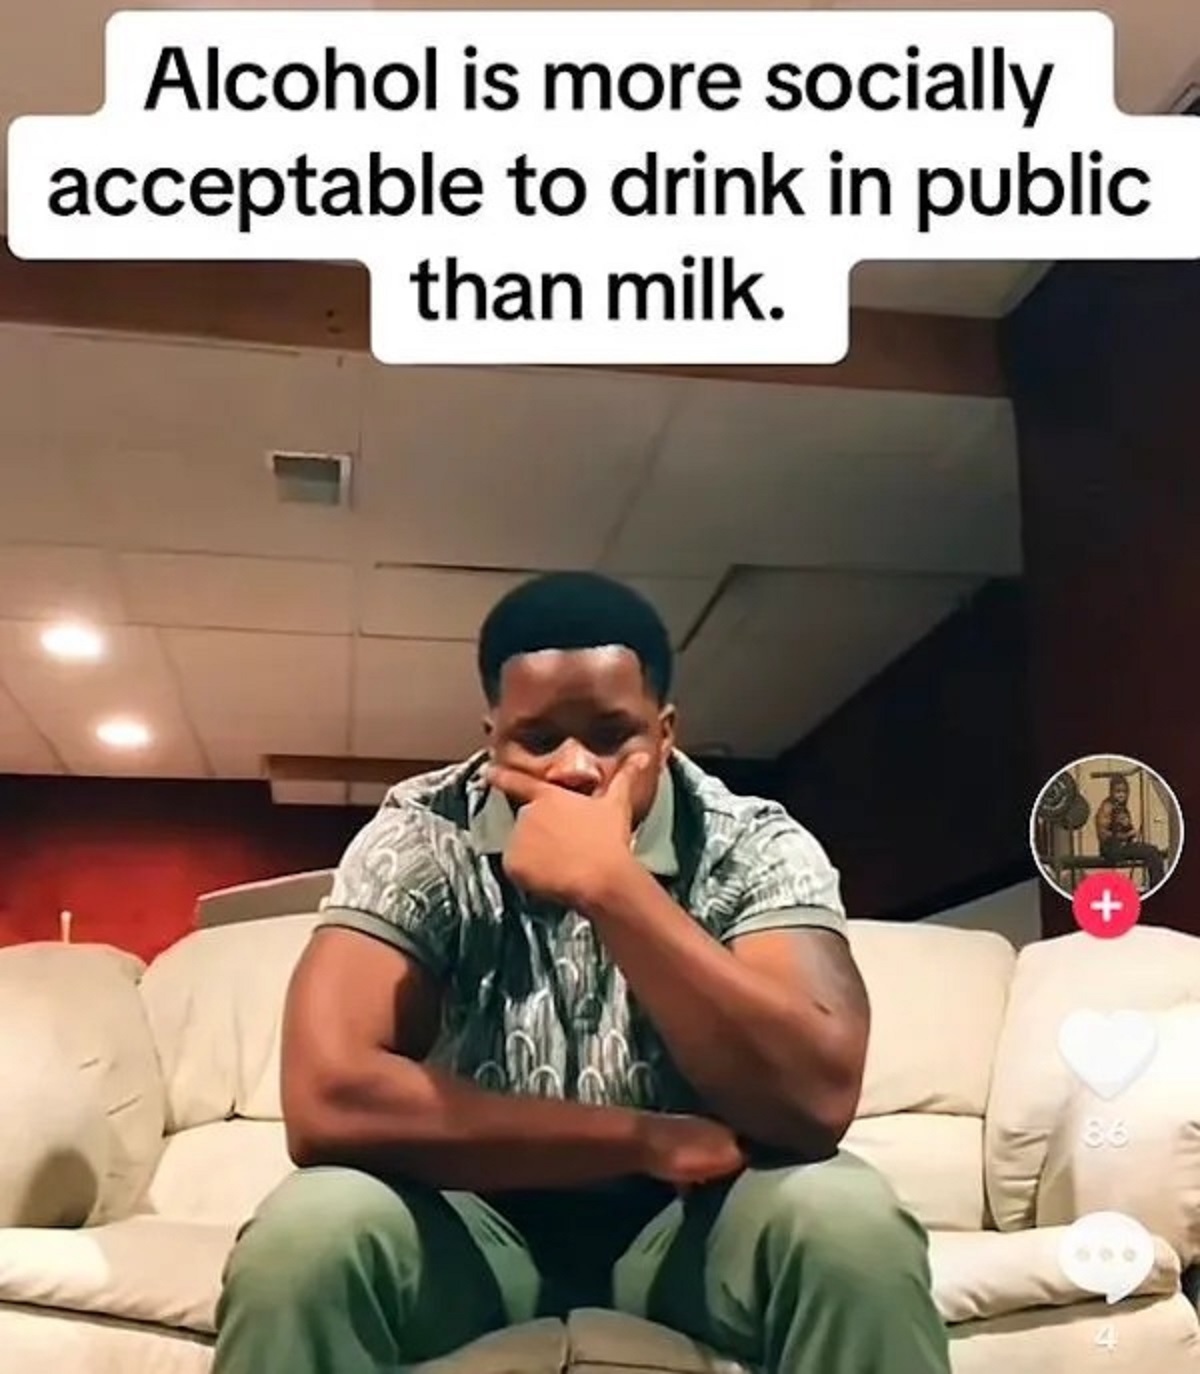 more socially acceptable to drink alcohol in public than milk - Alcohol is more socially acceptable to drink in public than milk. 86